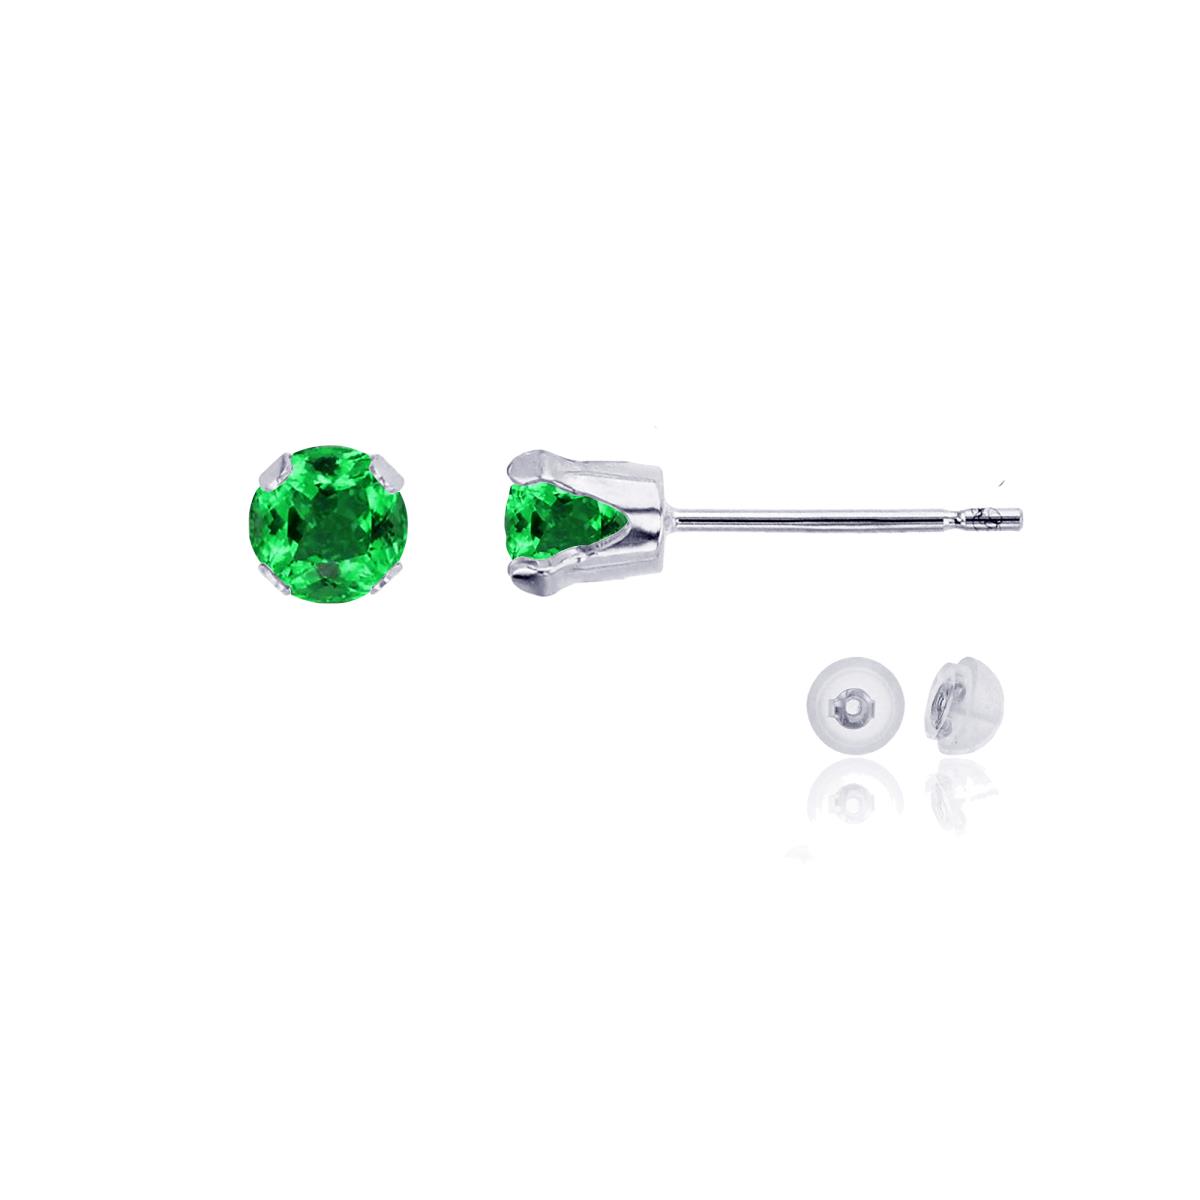 10K White Gold 4mm Round Cr Emerald Stud Earring with Silicone Back